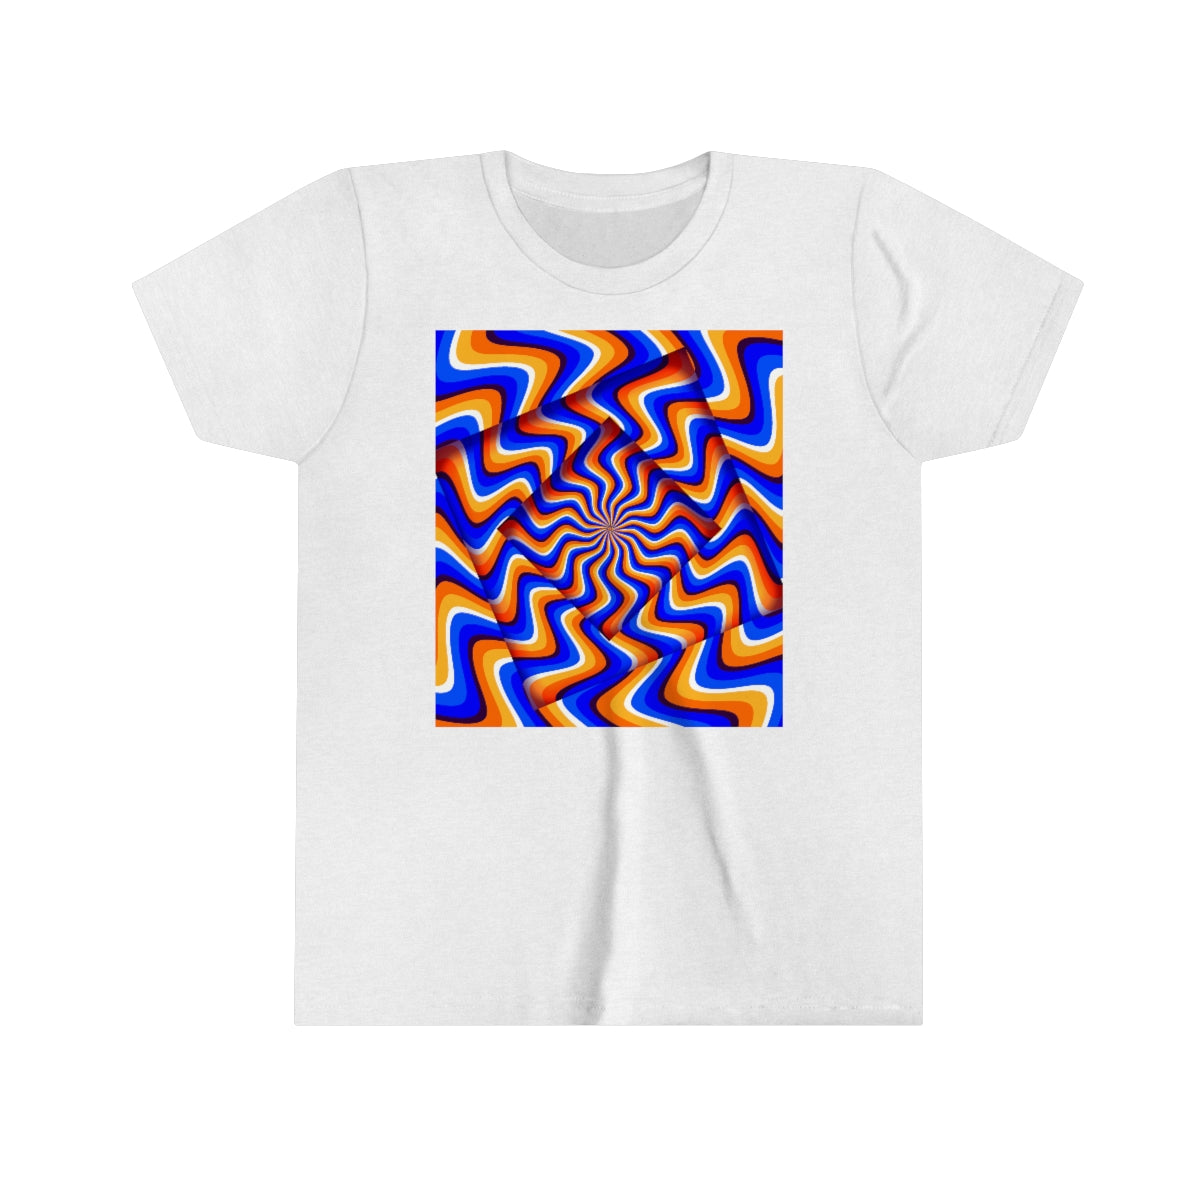 Youth Short Sleeve Tee "Optical illusion Abstract turned frames"